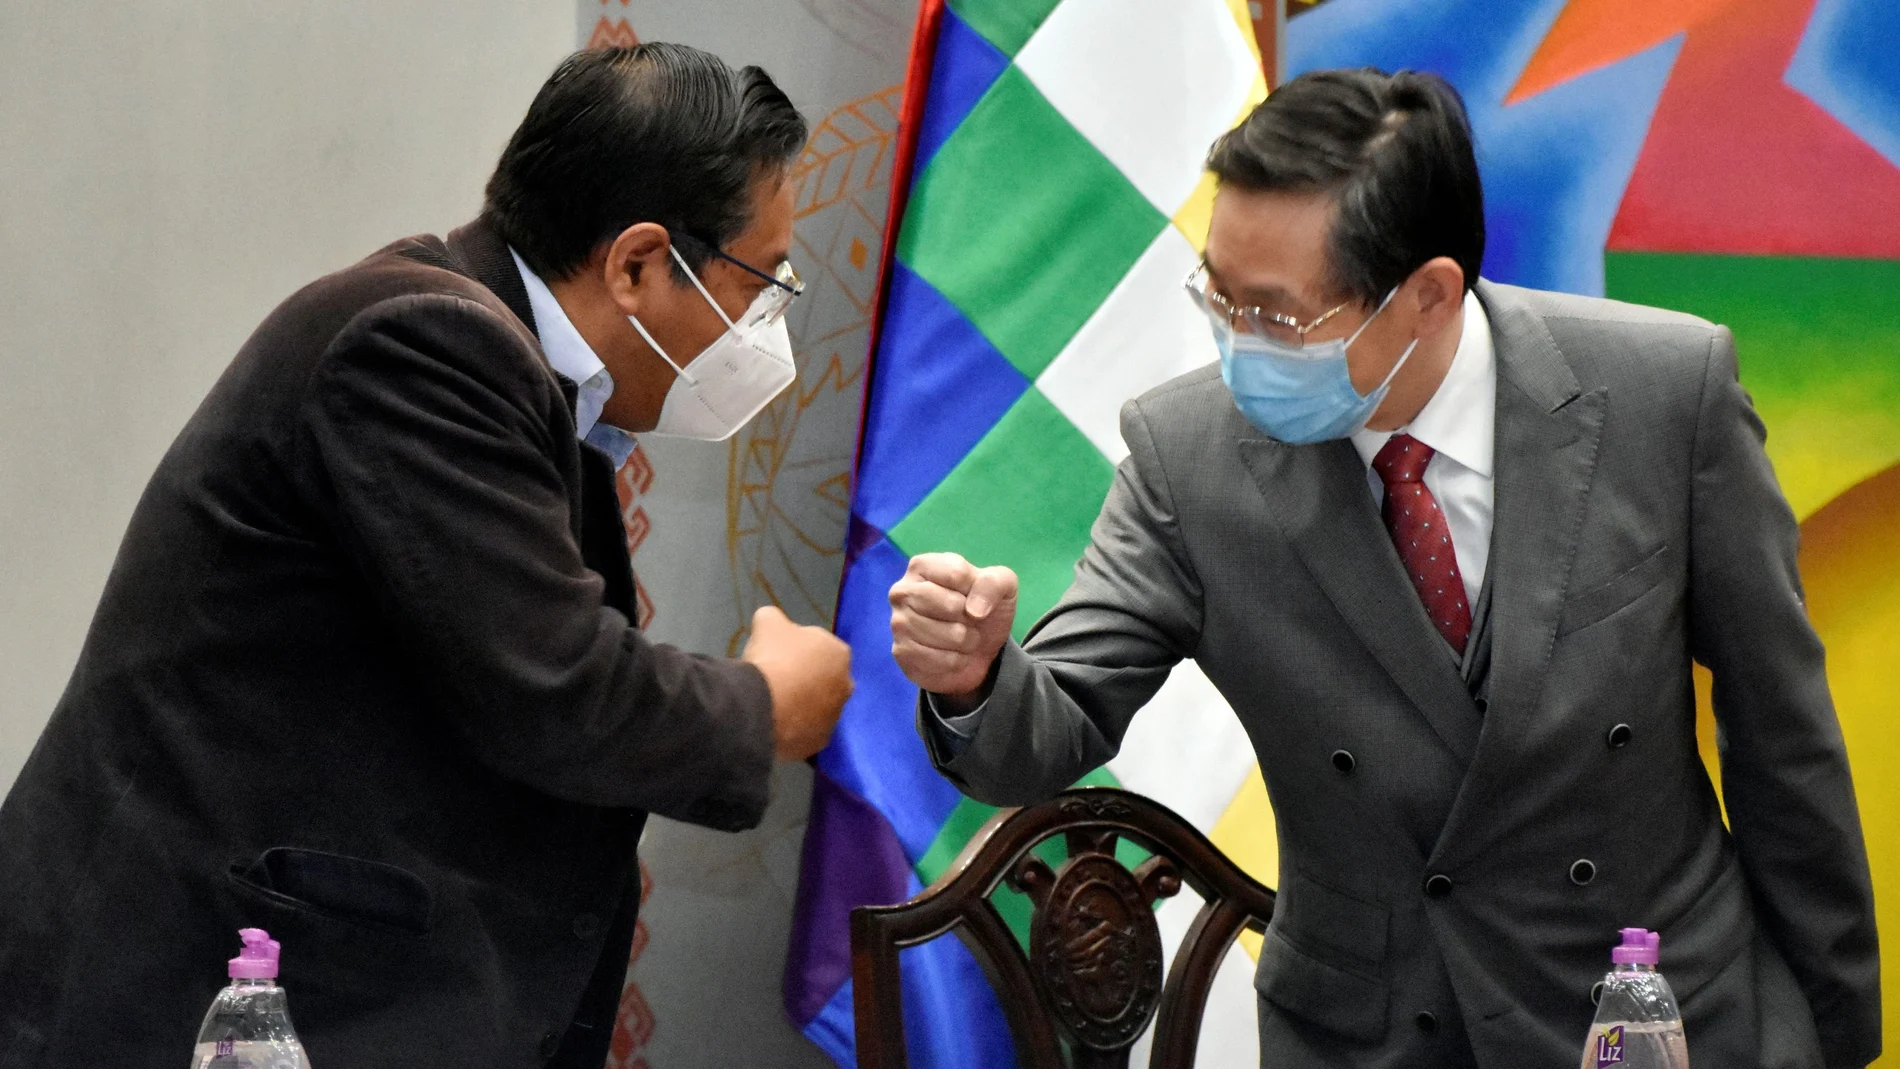 Bolivia's President Luis Arce greets China's Ambassador Huang Yazhong during a ceremony of the agreement with Chinese Sinopharm, locking in an initial supply of half a million doses of the company's vaccine against the coronavirus disease (COVID-19), at the Casa Grande del Pueblo palace in La Paz, Bolivia, February 11, 2021. Courtesy of Bolivian Presidency/Jorge Mamani/Handout via REUTERS ATTENTION EDITORS - THIS IMAGE WAS PROVIDED BY A THIRD PARTY. NO RESALES. NO ARCHIVES